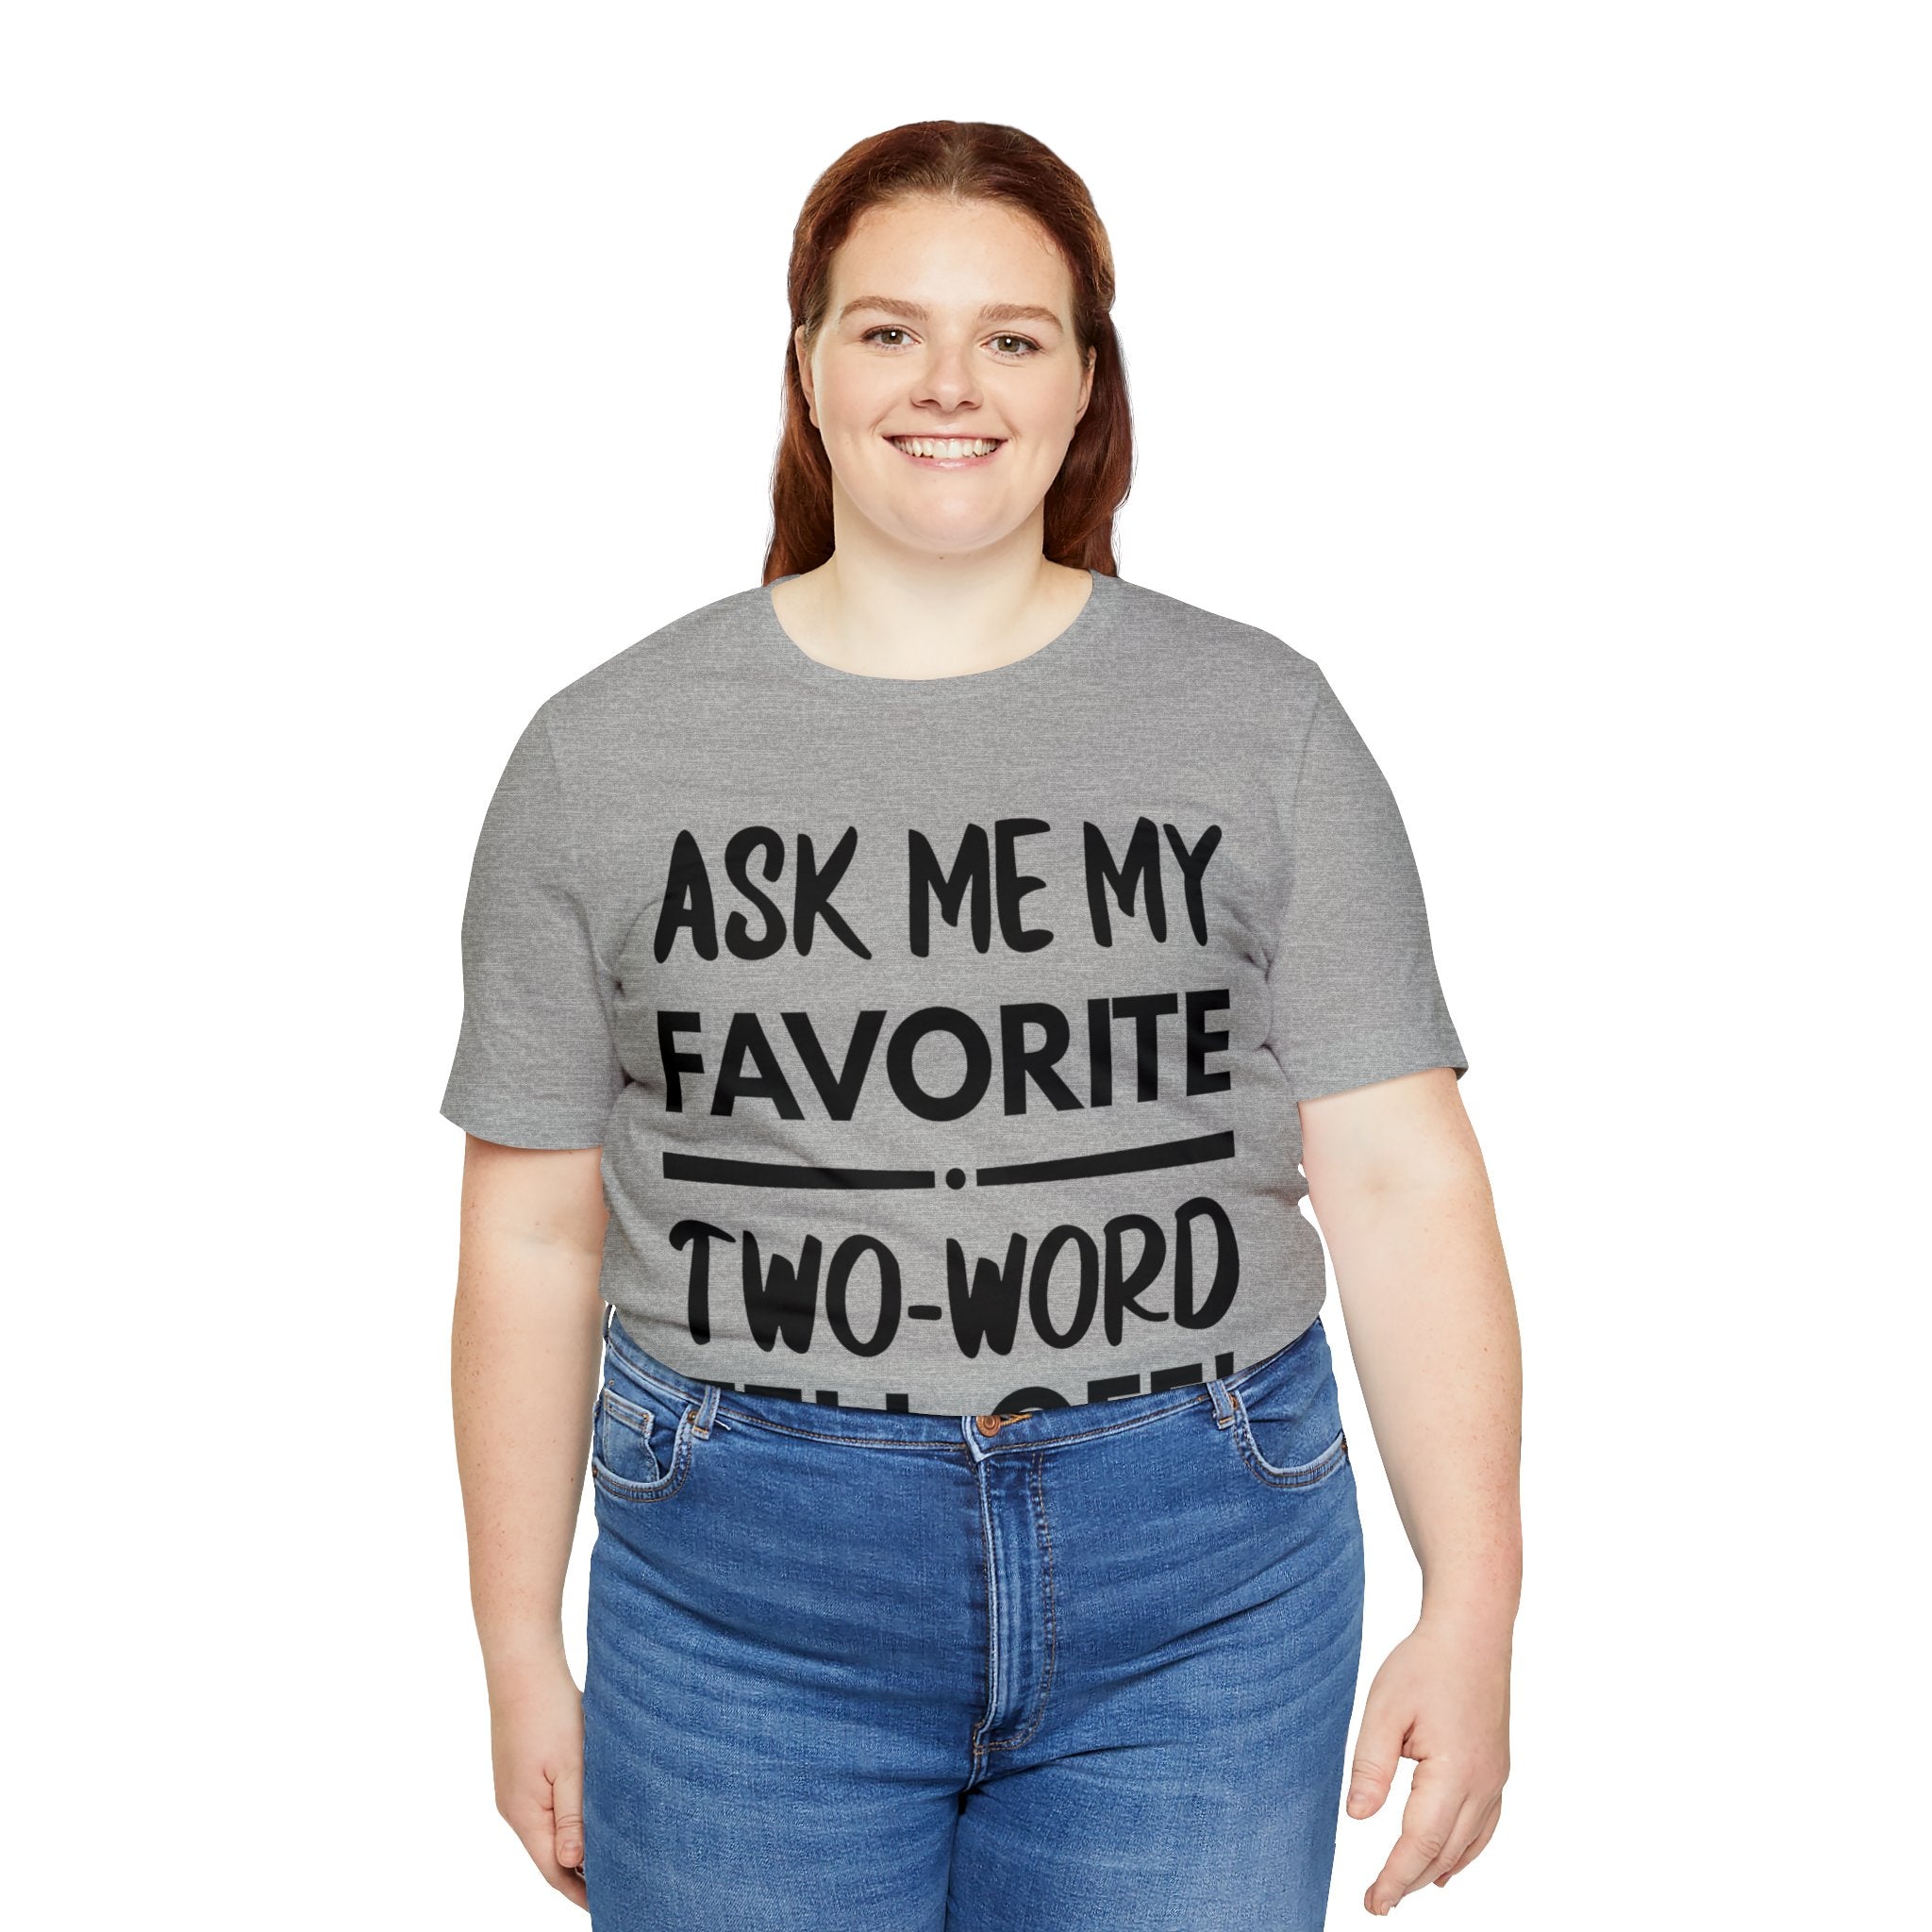 Two-Word Tell Off Tee